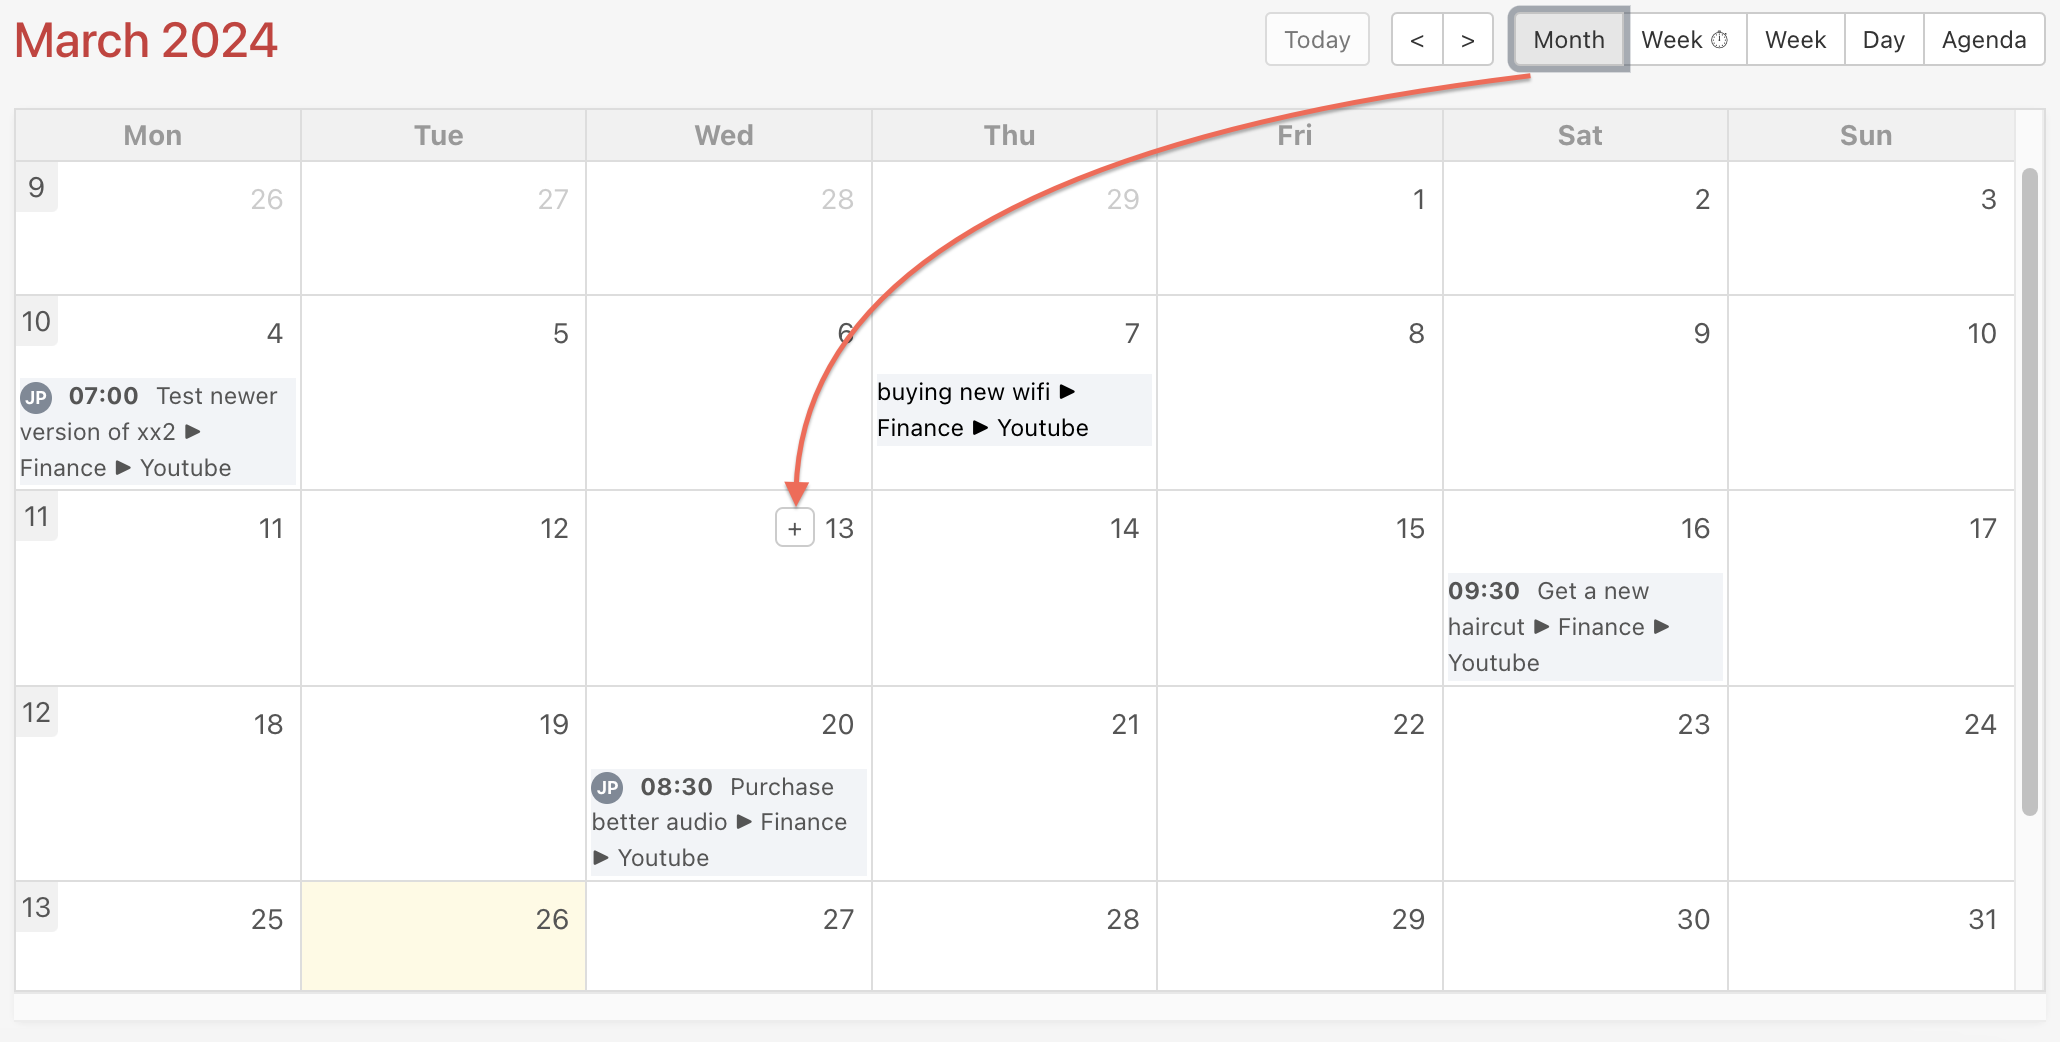 Example how to add a new task in the Calendar via the + button in the monthly view.